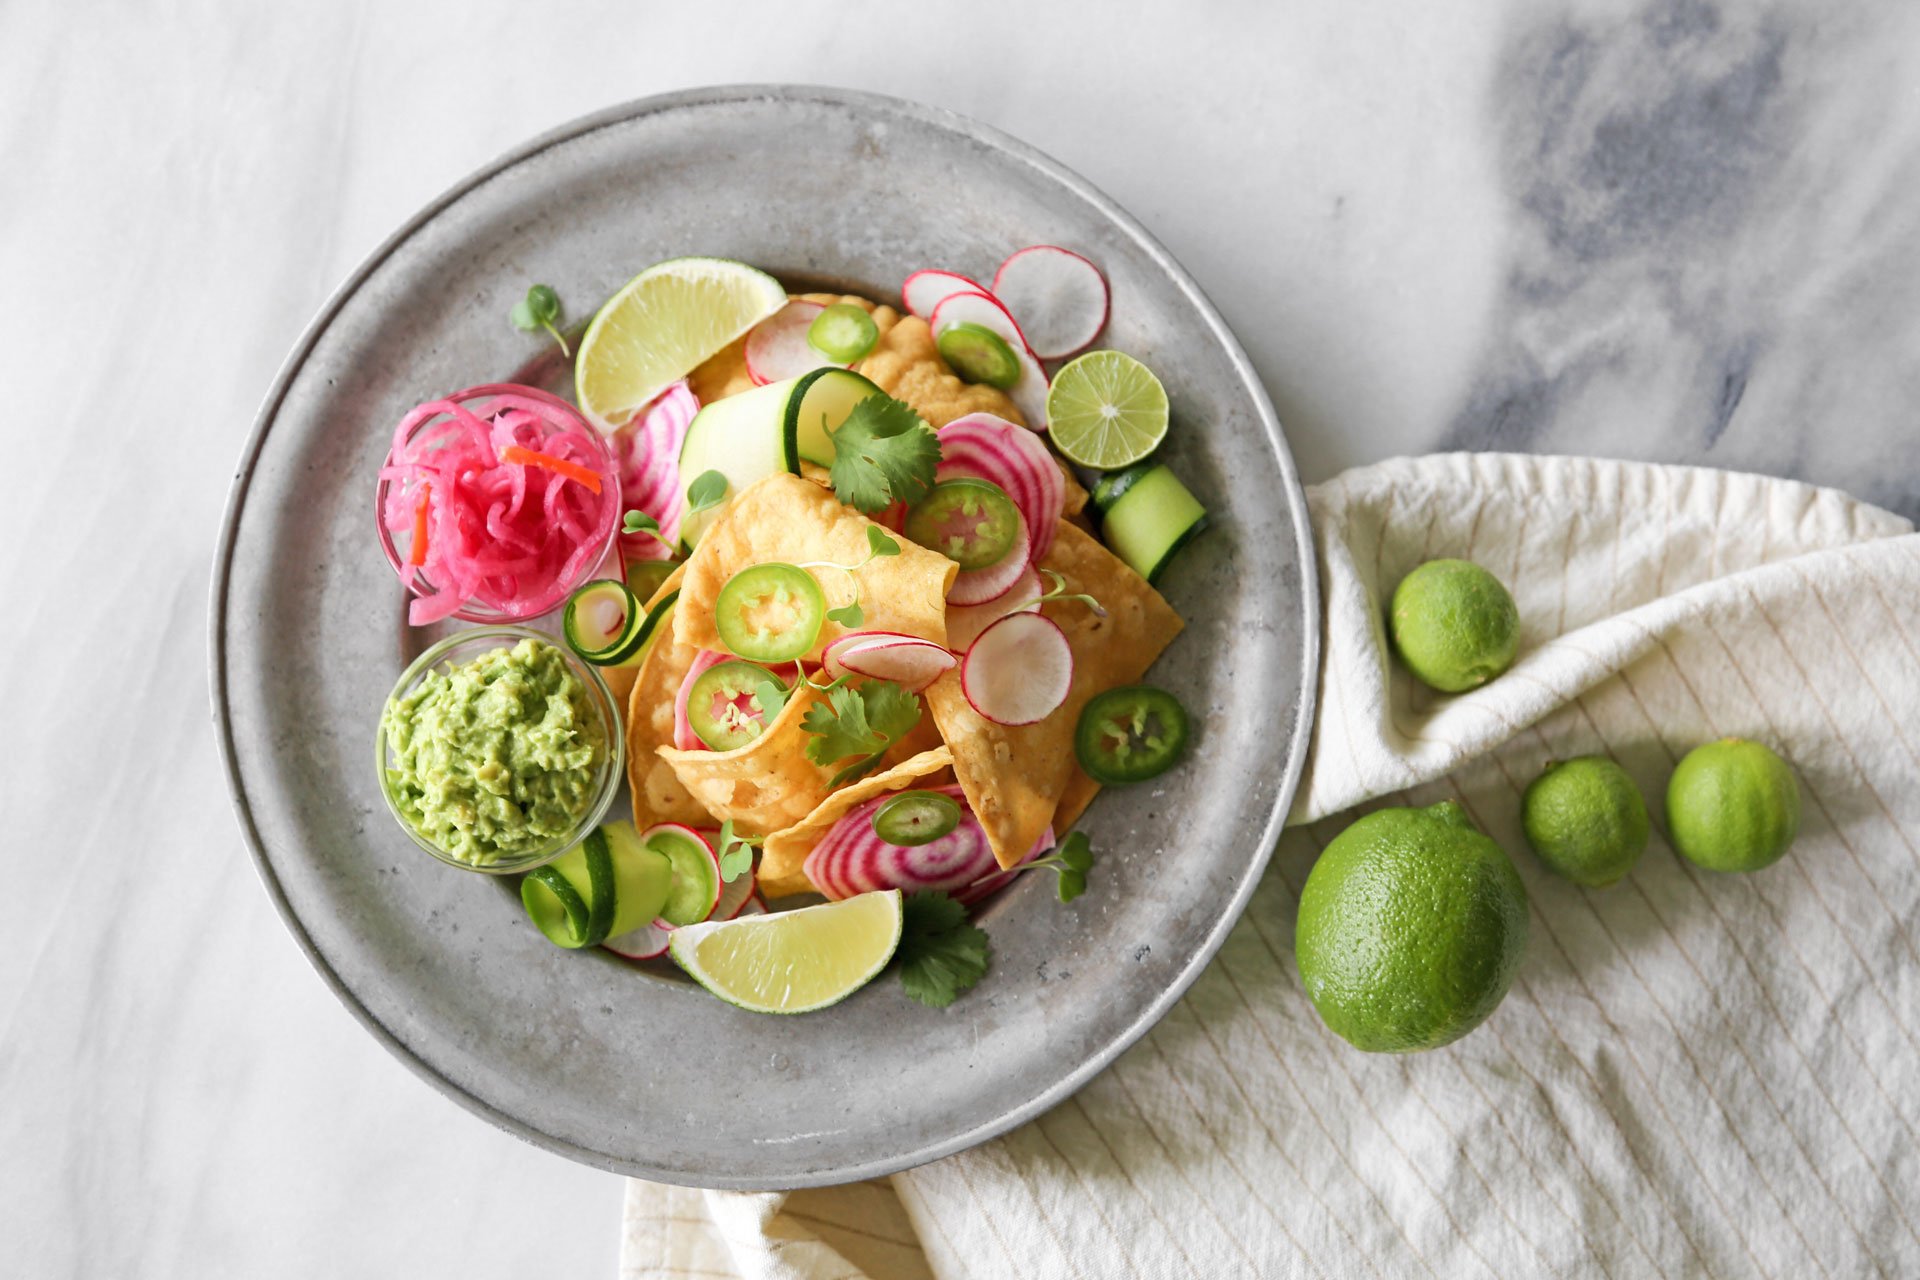 Chips and guacamole with pickled onion, limes, and radishes